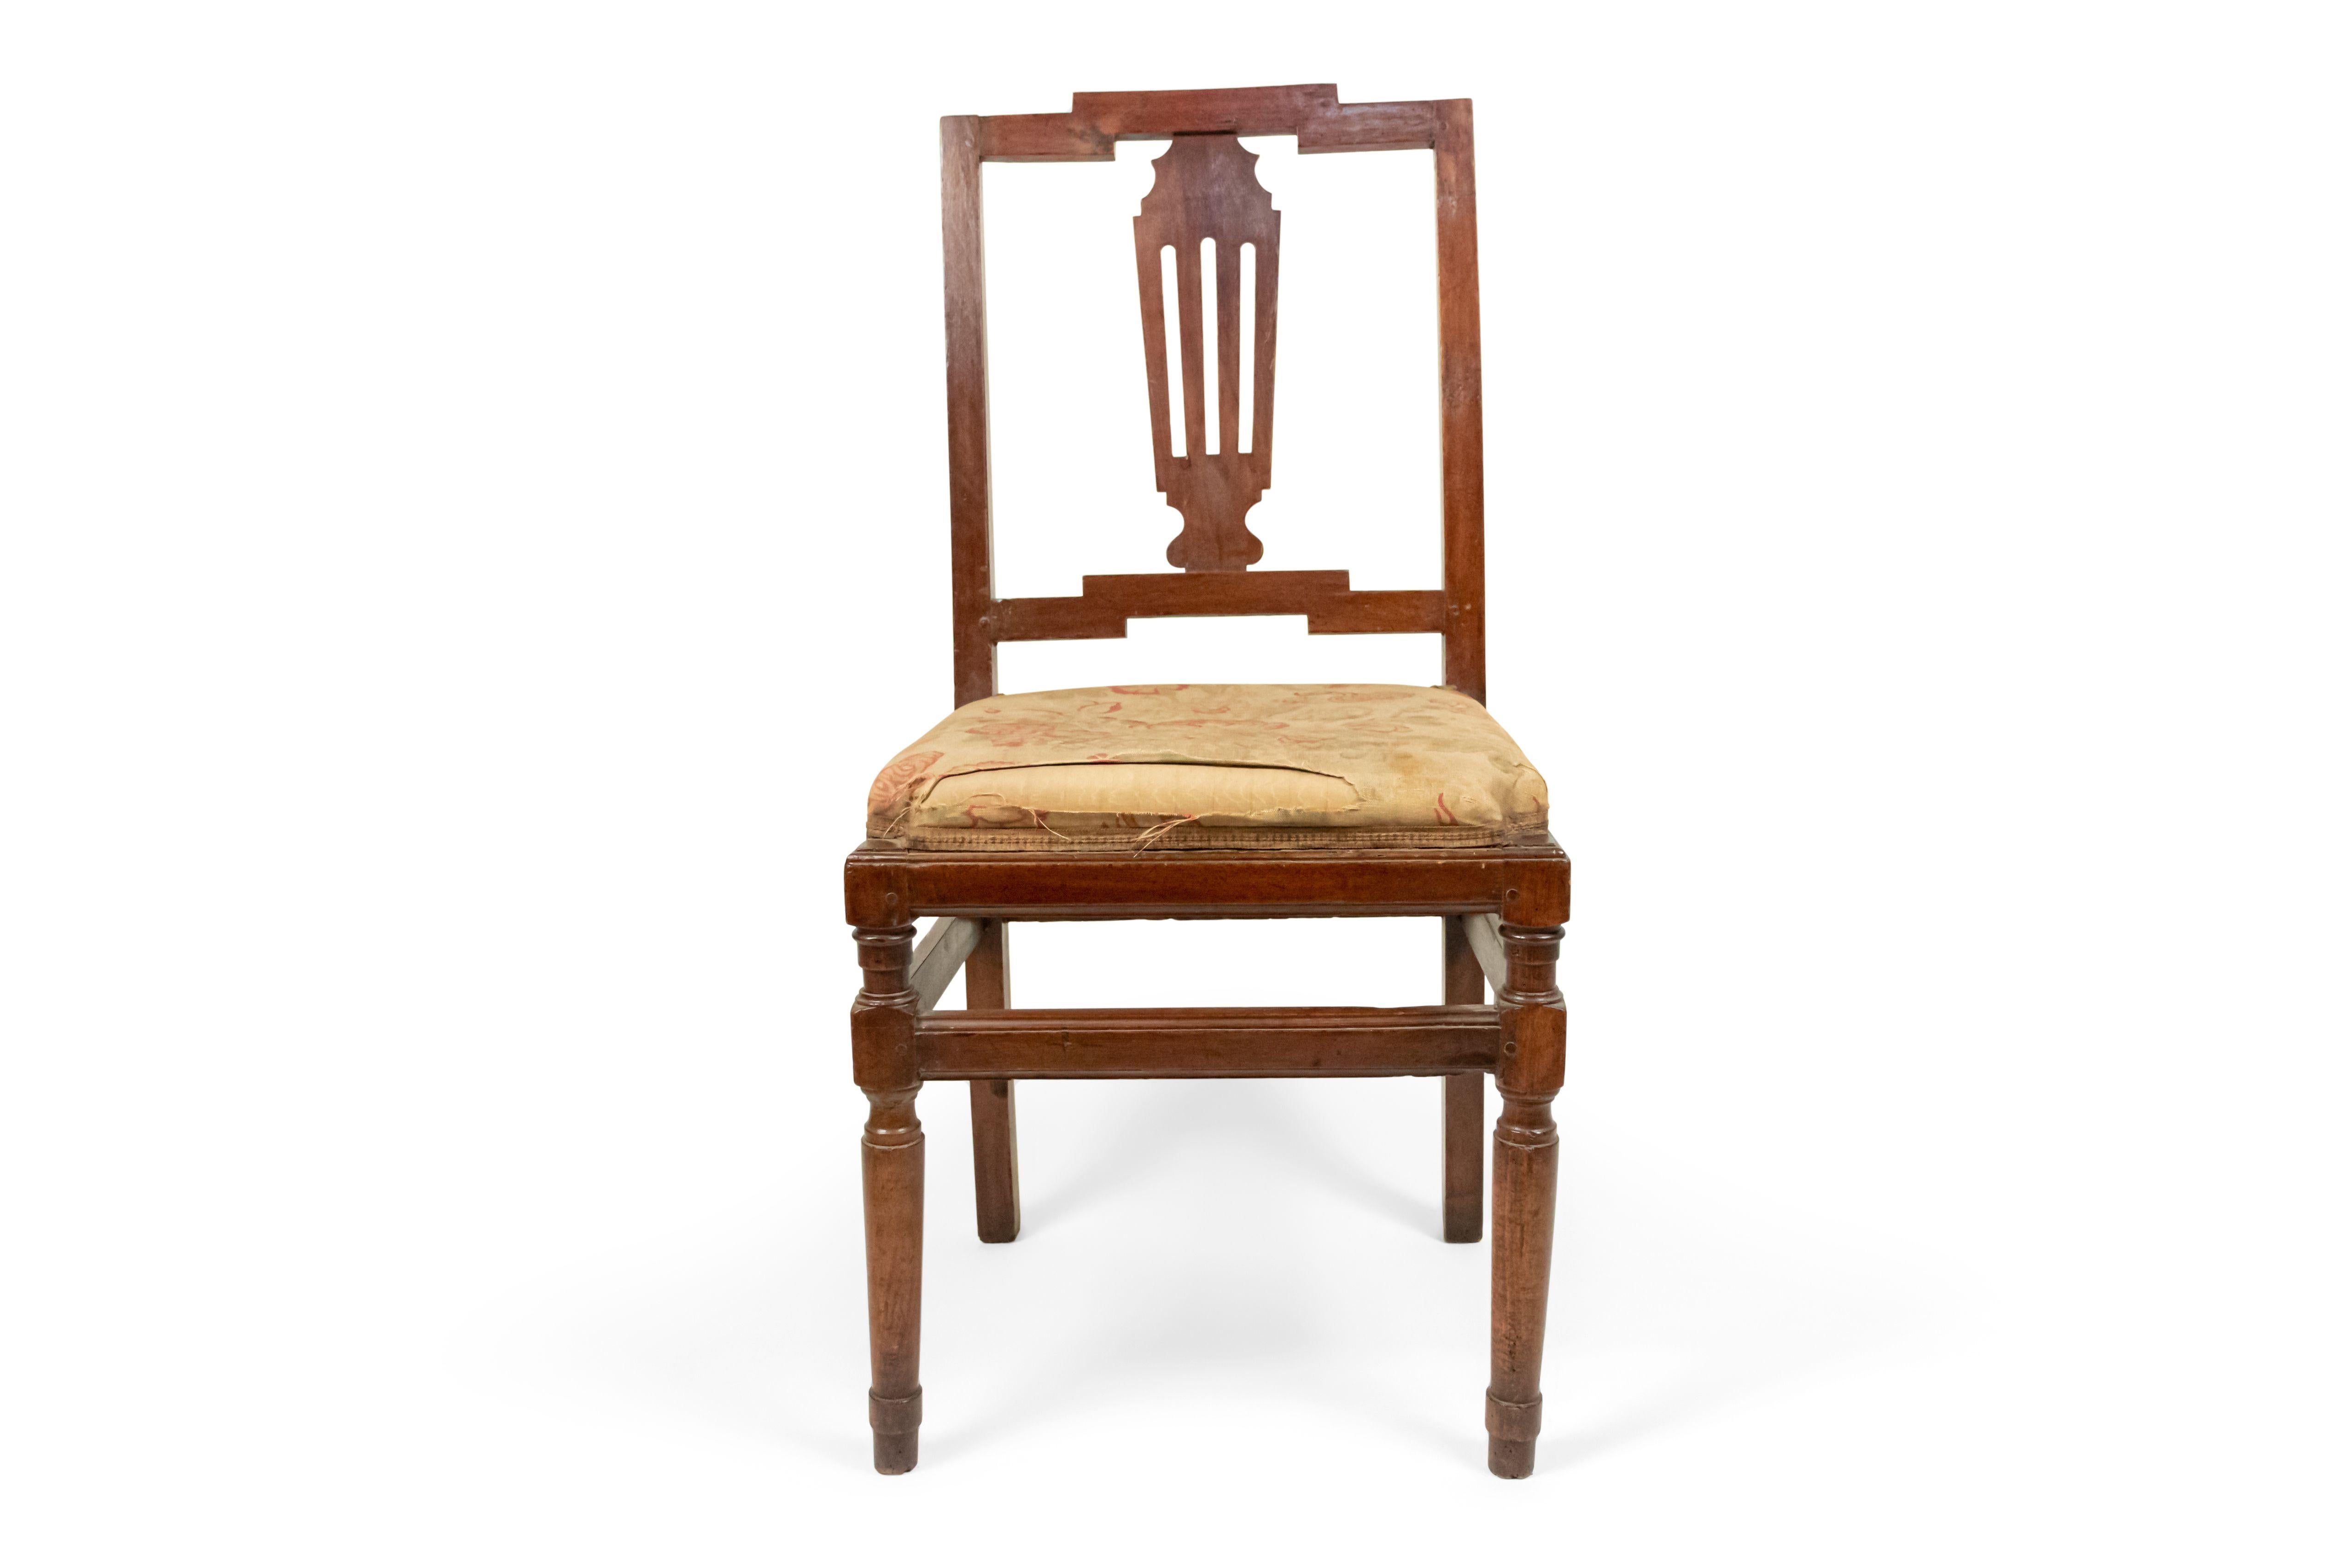 Pair of Continental neoclassic style mahogany side chairs with squared back and pierced vertical splat above turned legs. (possibly Italian, 19th century).